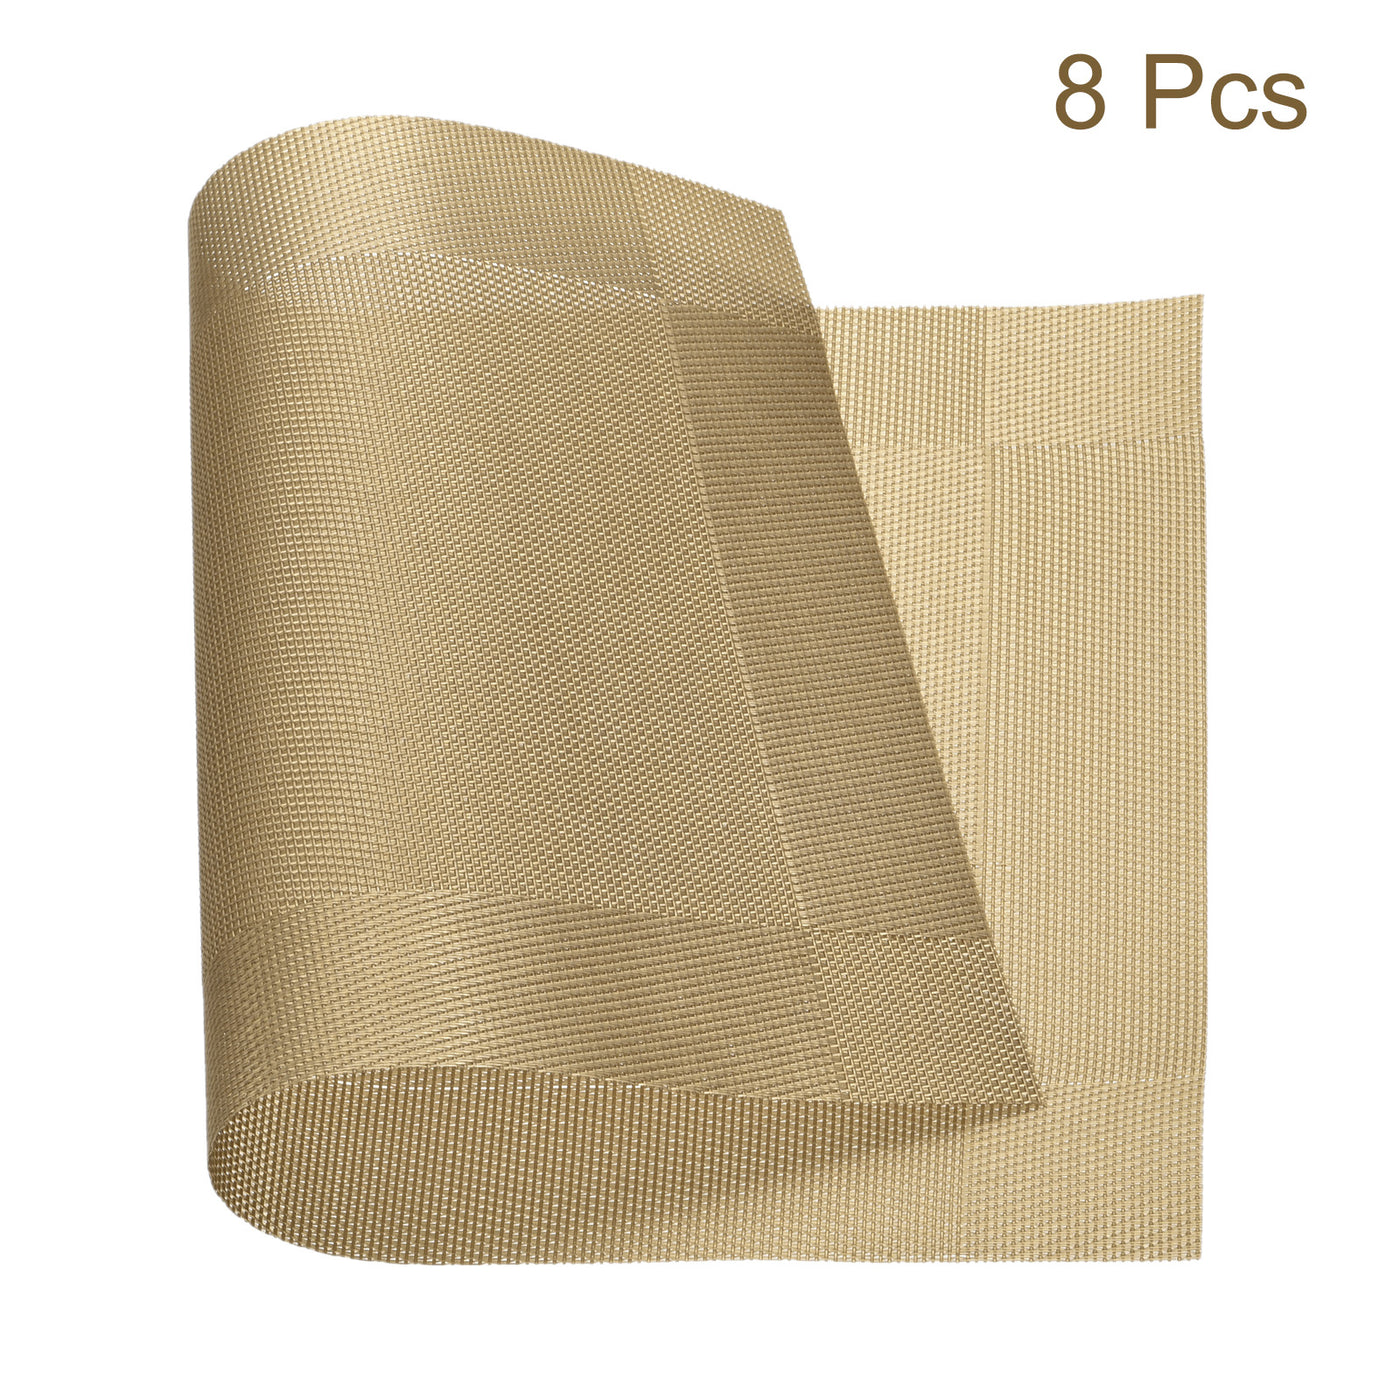 uxcell Uxcell Place Mats 450x300mm 8pcs PVC Table Washable Woven Placemat, Gold Tone